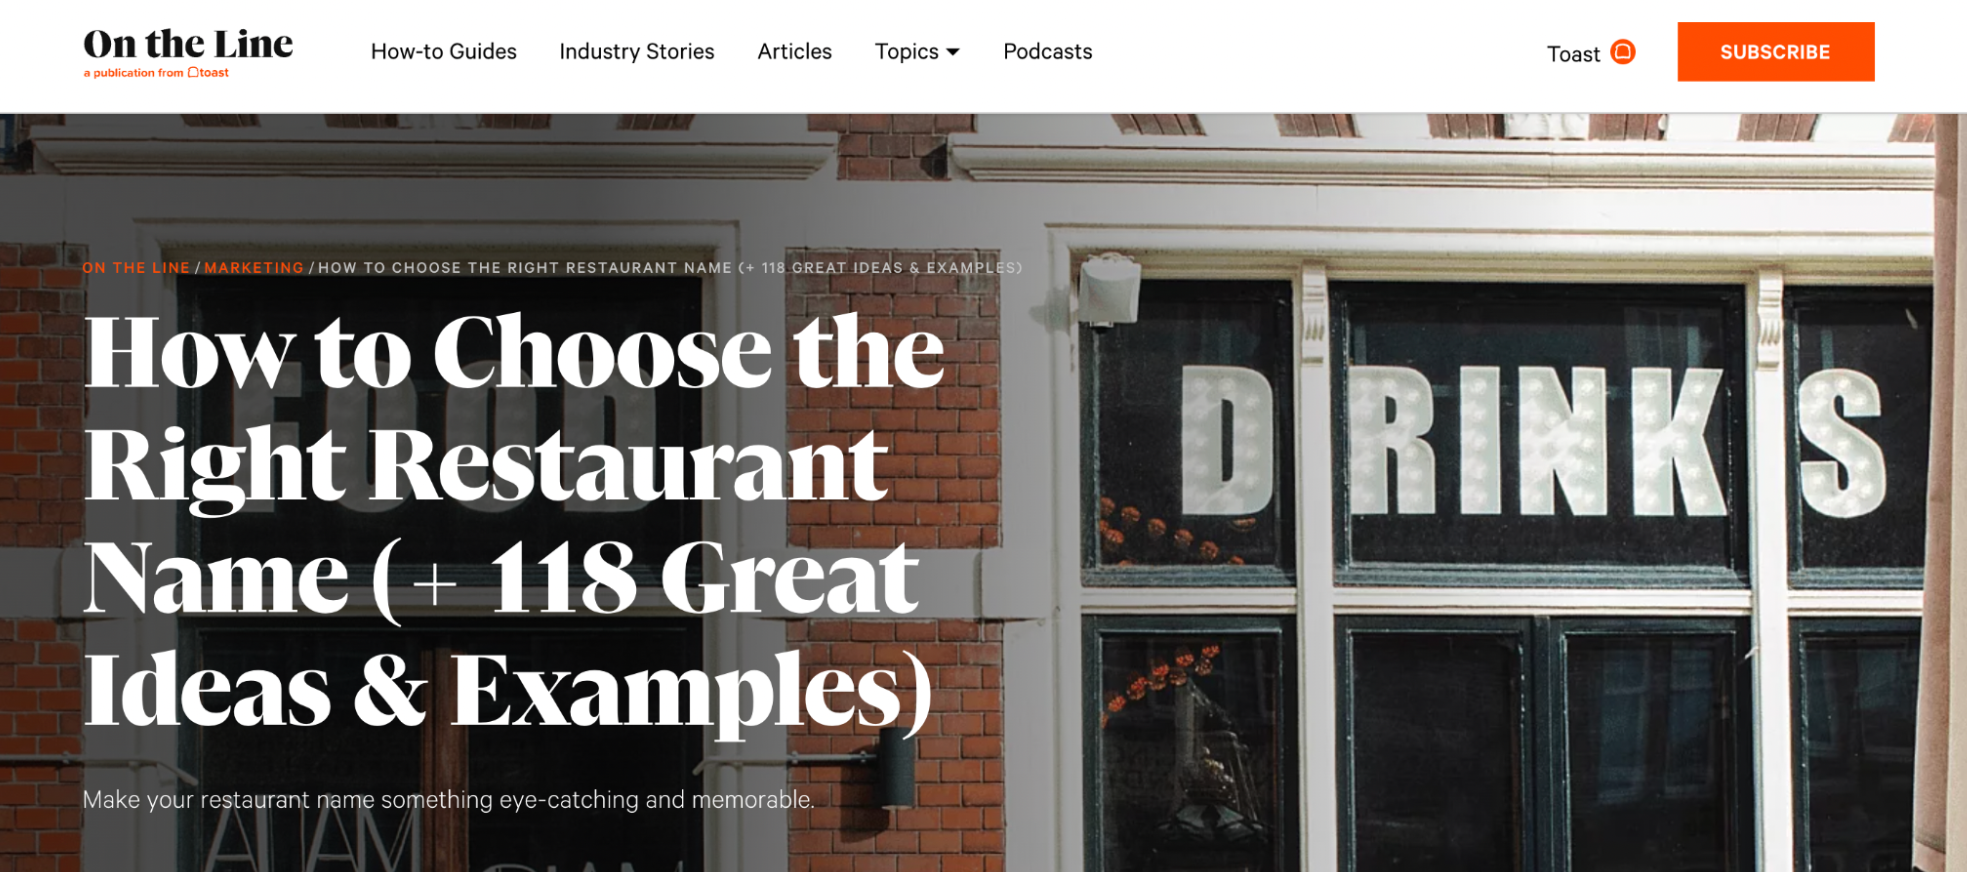 How to Choose the Right Restaurant Name Plus 118 Ideas & Examples